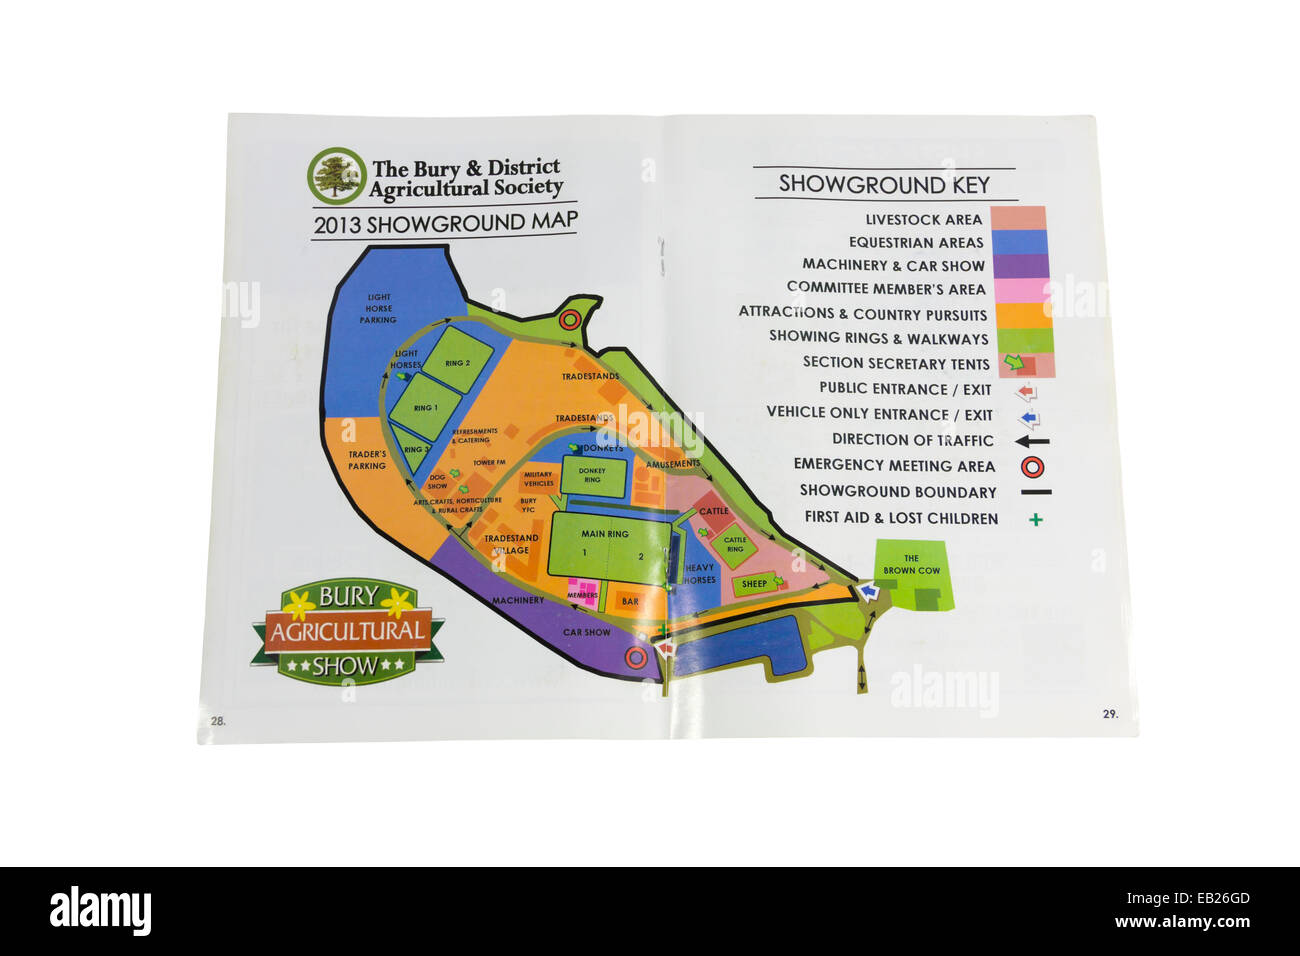 Map diagram of the Bury & District Agricultural Society Agricultural Show showground for 2013. Stock Photo